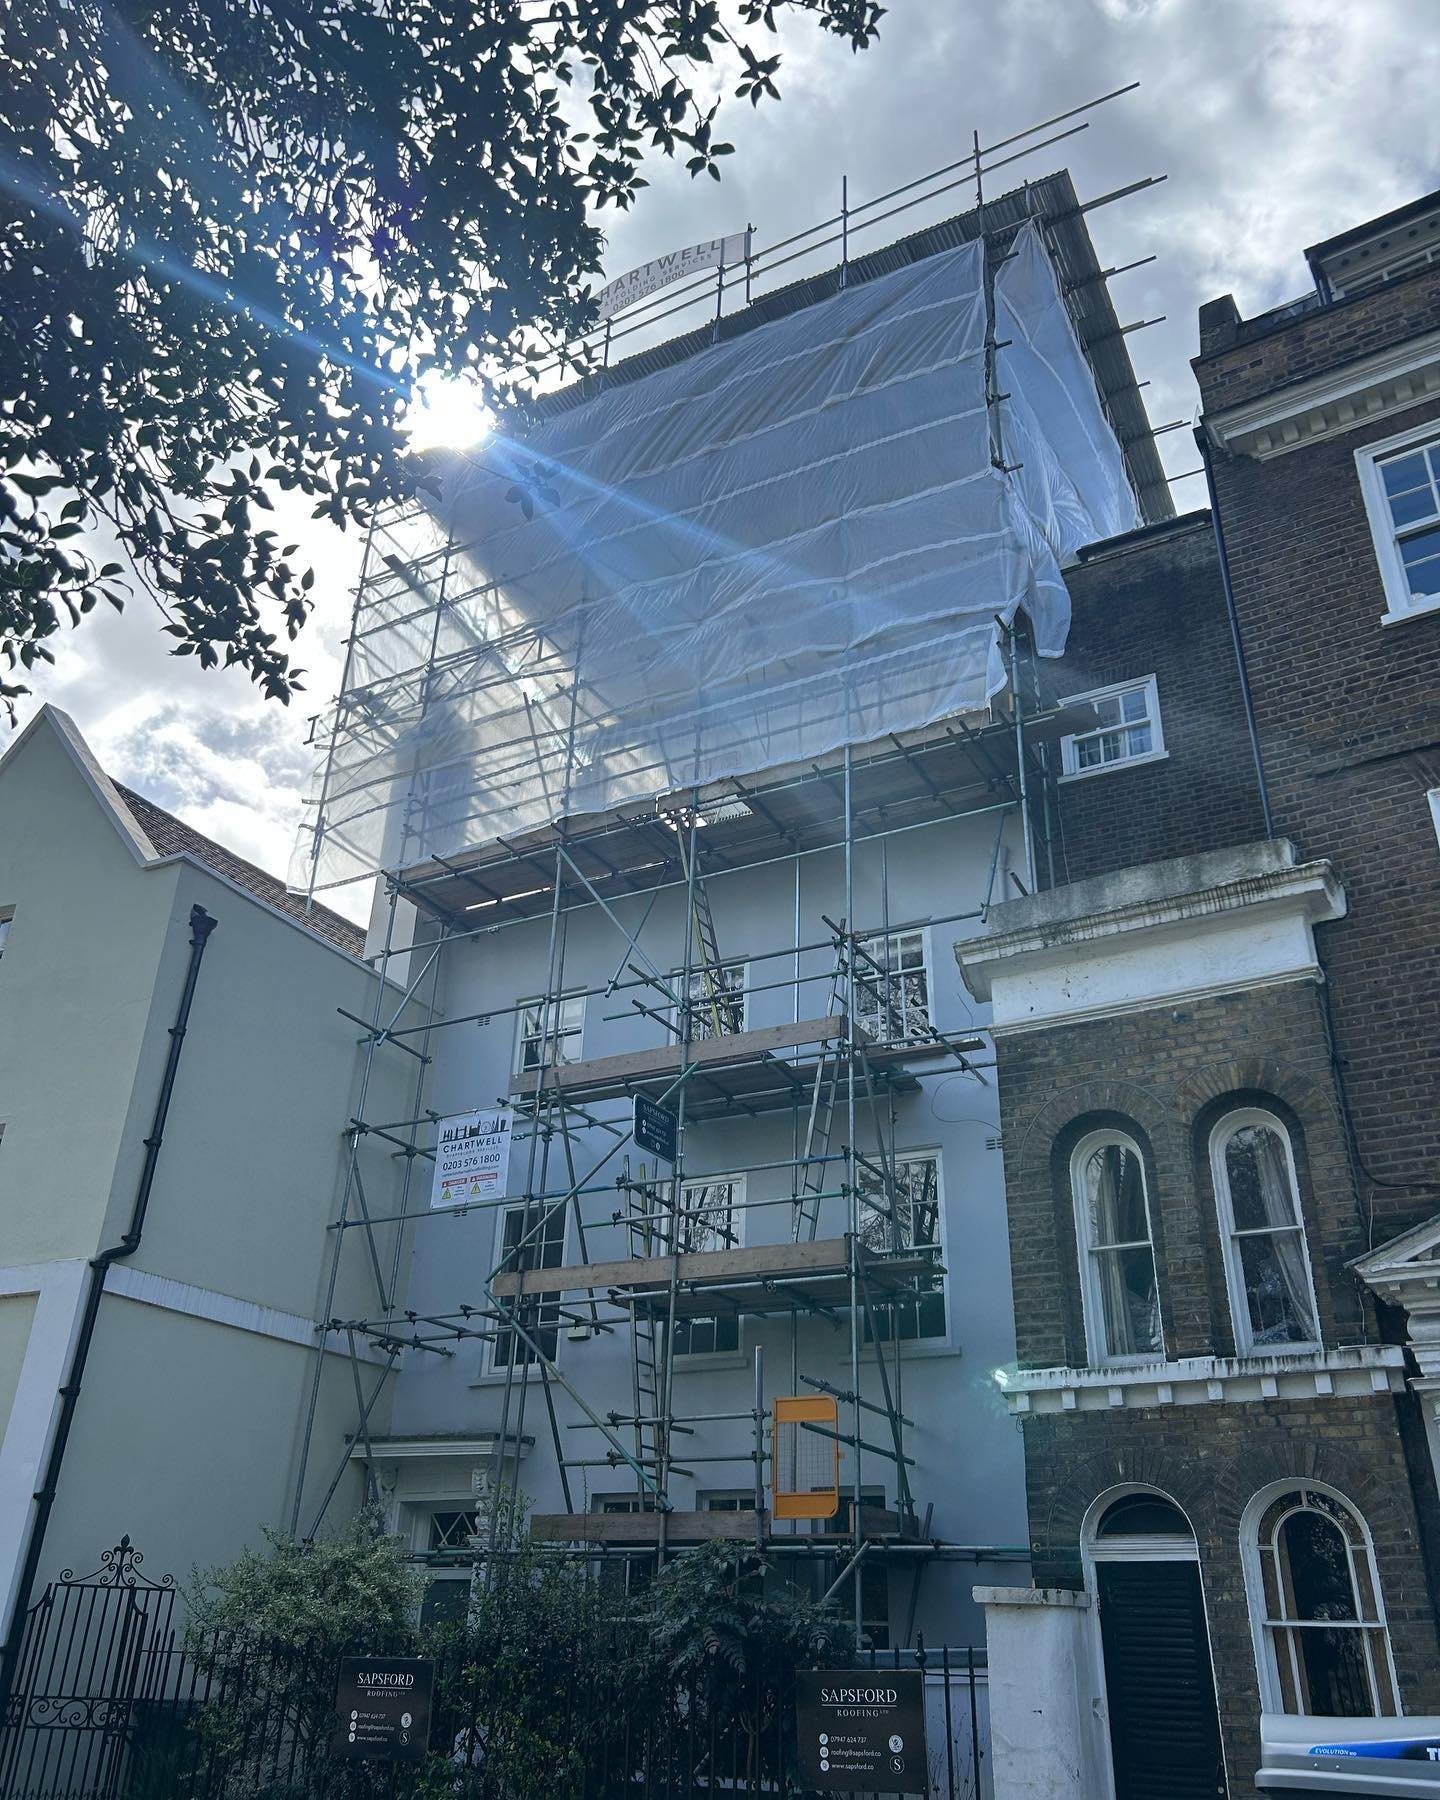 We started a new Project today in Greenwich a completely reroof with all new celtex insulation going in and all new clay plain tiles and all new code 6 lead work to box gutters and dormers. visit www.sapsford.Co